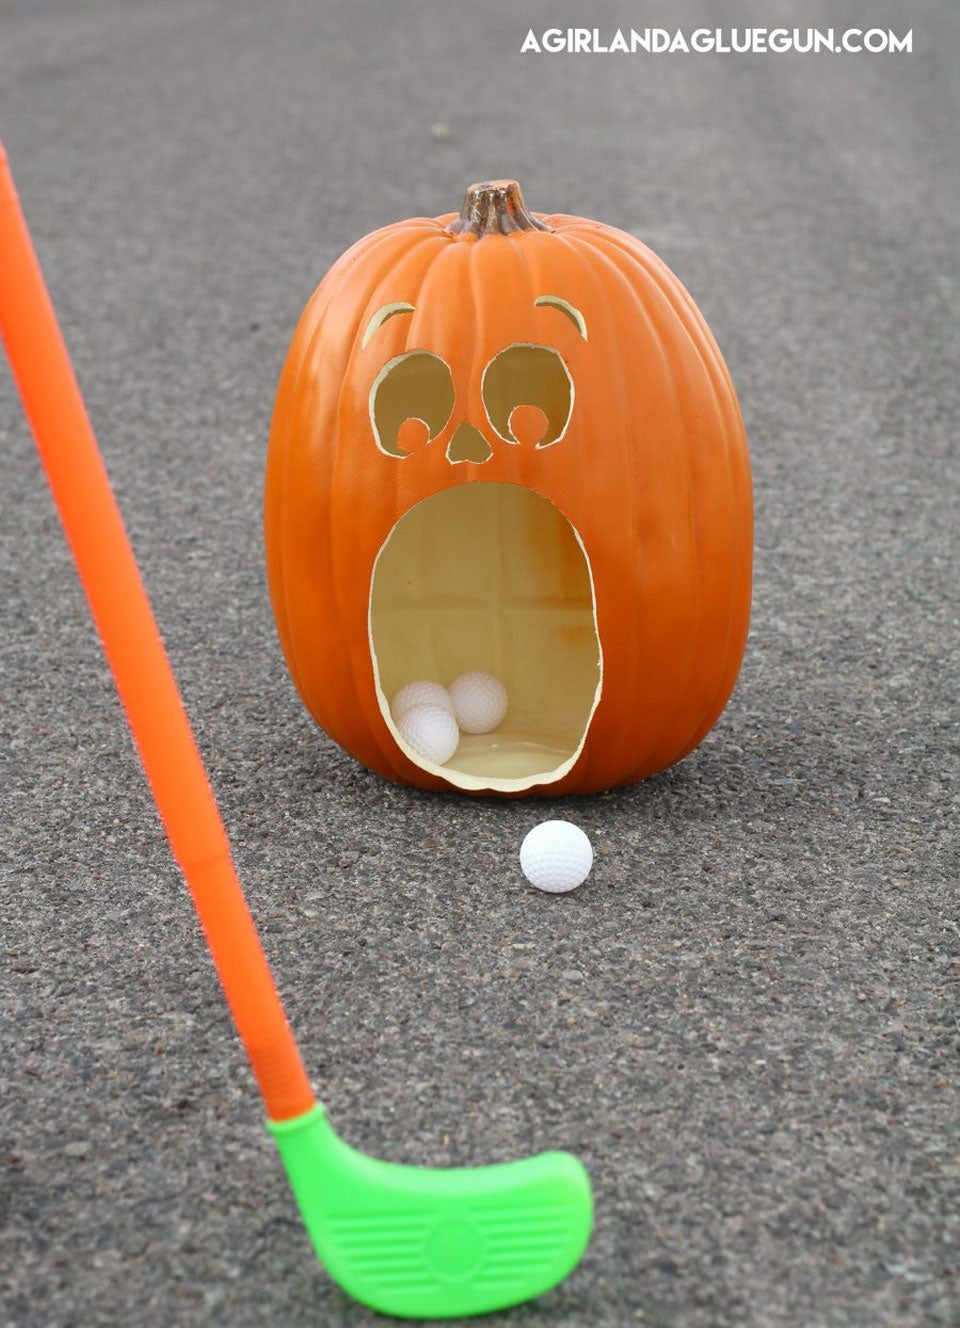 This fun carving idea doubles as a fun putting game.